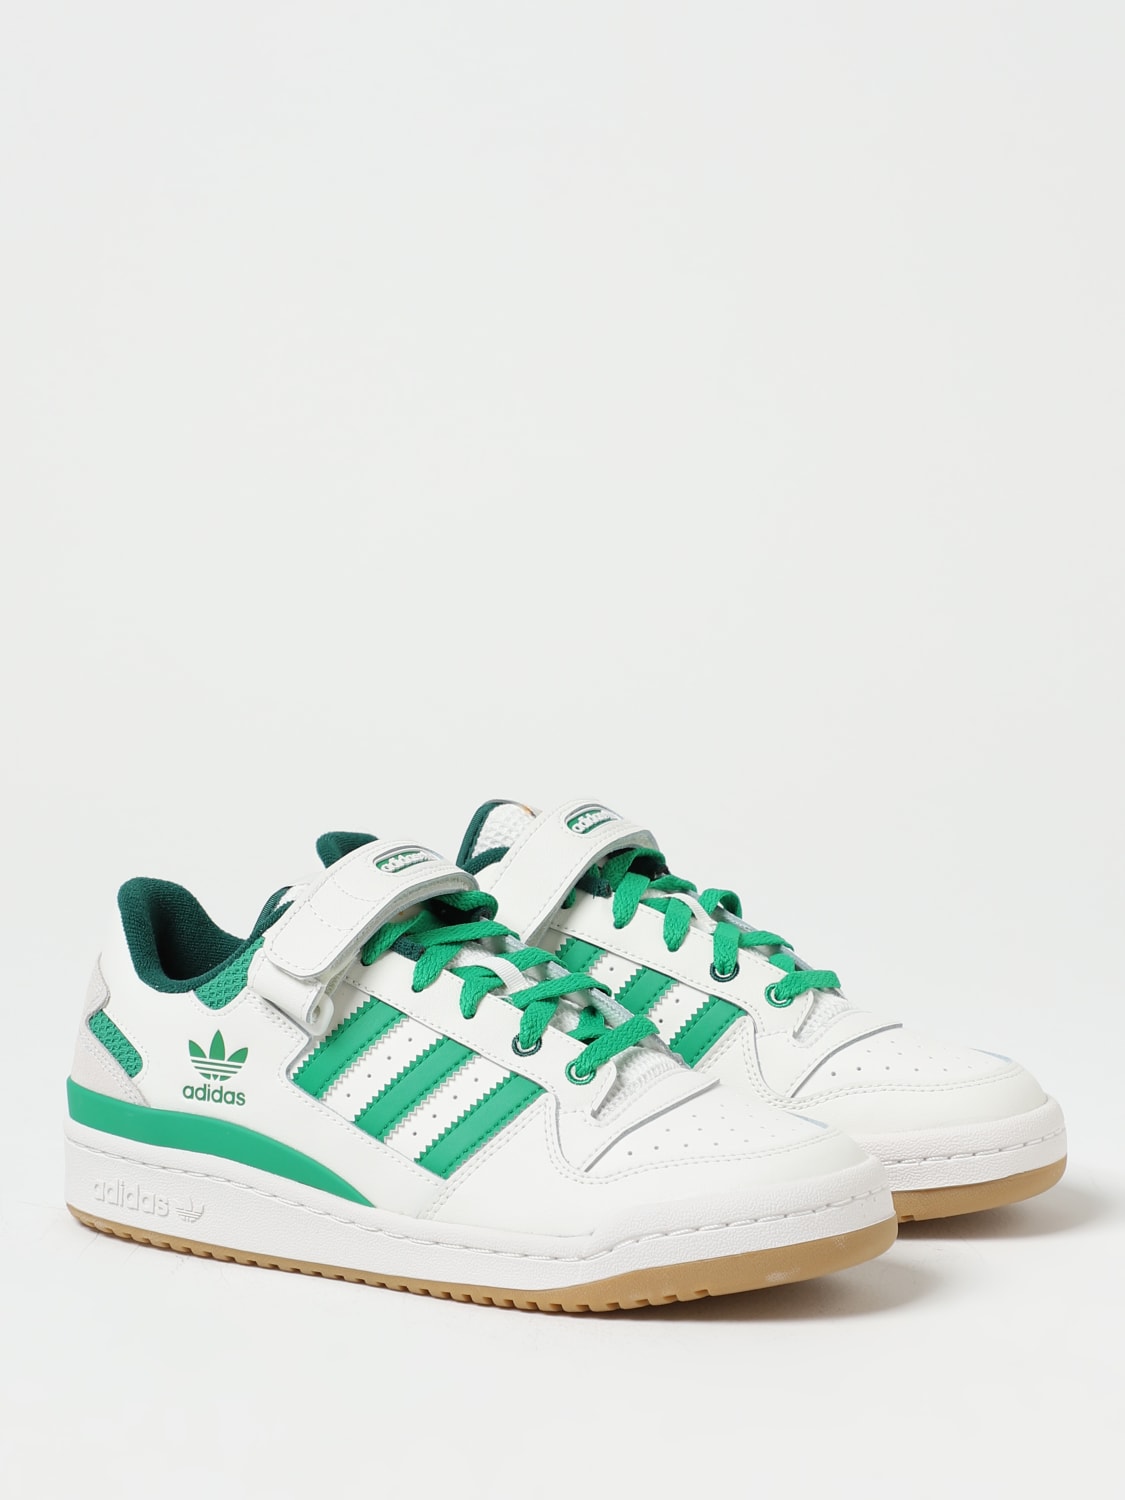 - at | online fabrics ORIGINALS: sneakers Originals White Adidas Forum IE7175 ADIDAS sneakers in Low recycled